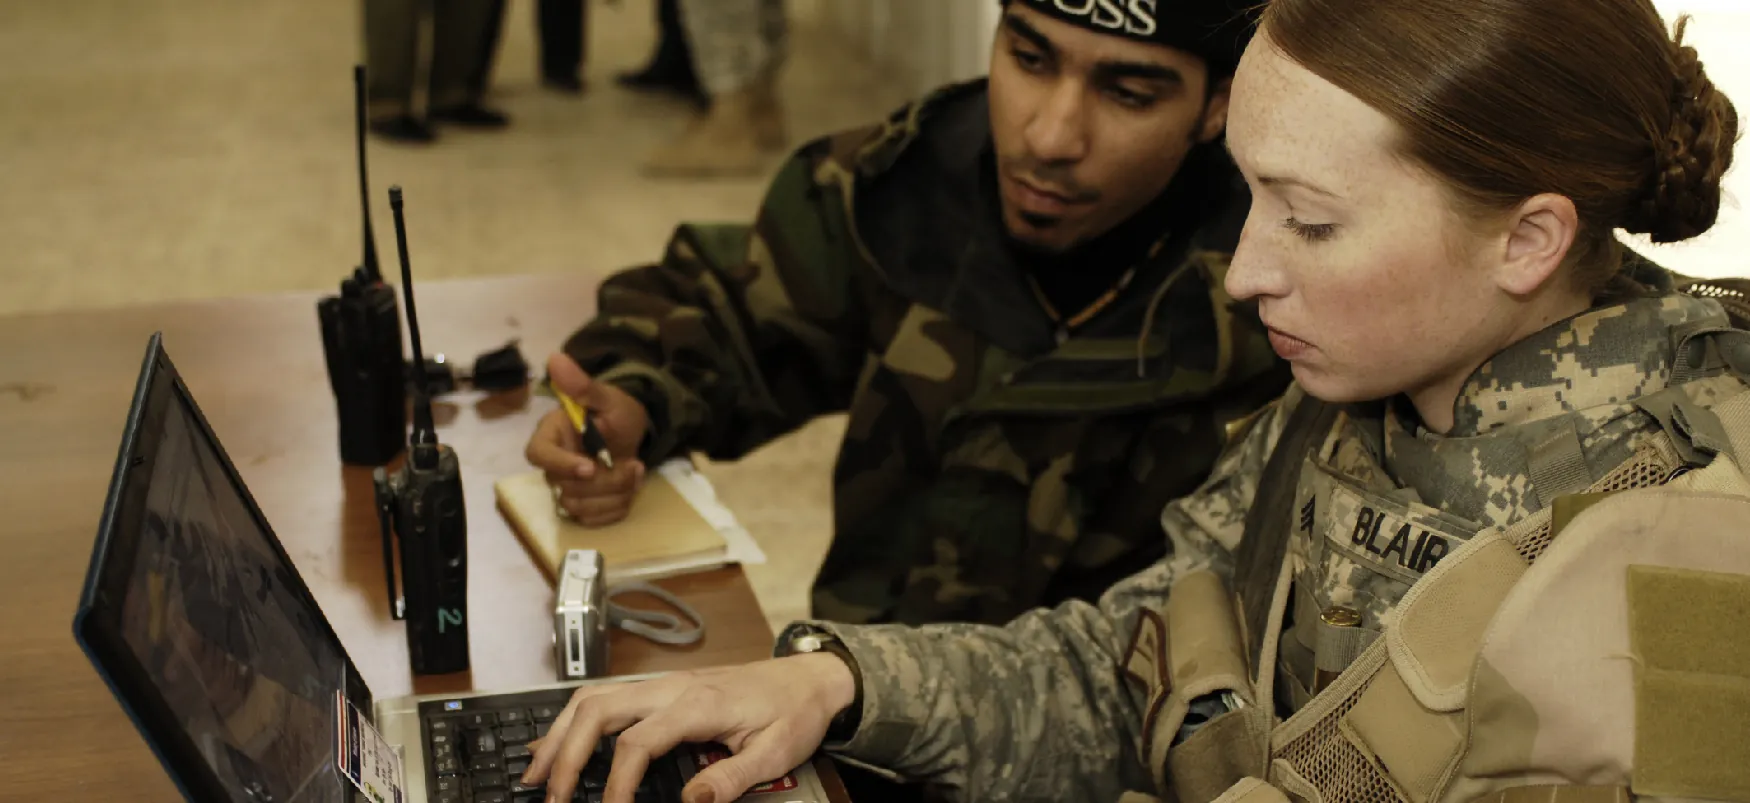 A military sergeant sits with an Iraqi police officer and enters the Iraqi police officer’s statements into a computer.